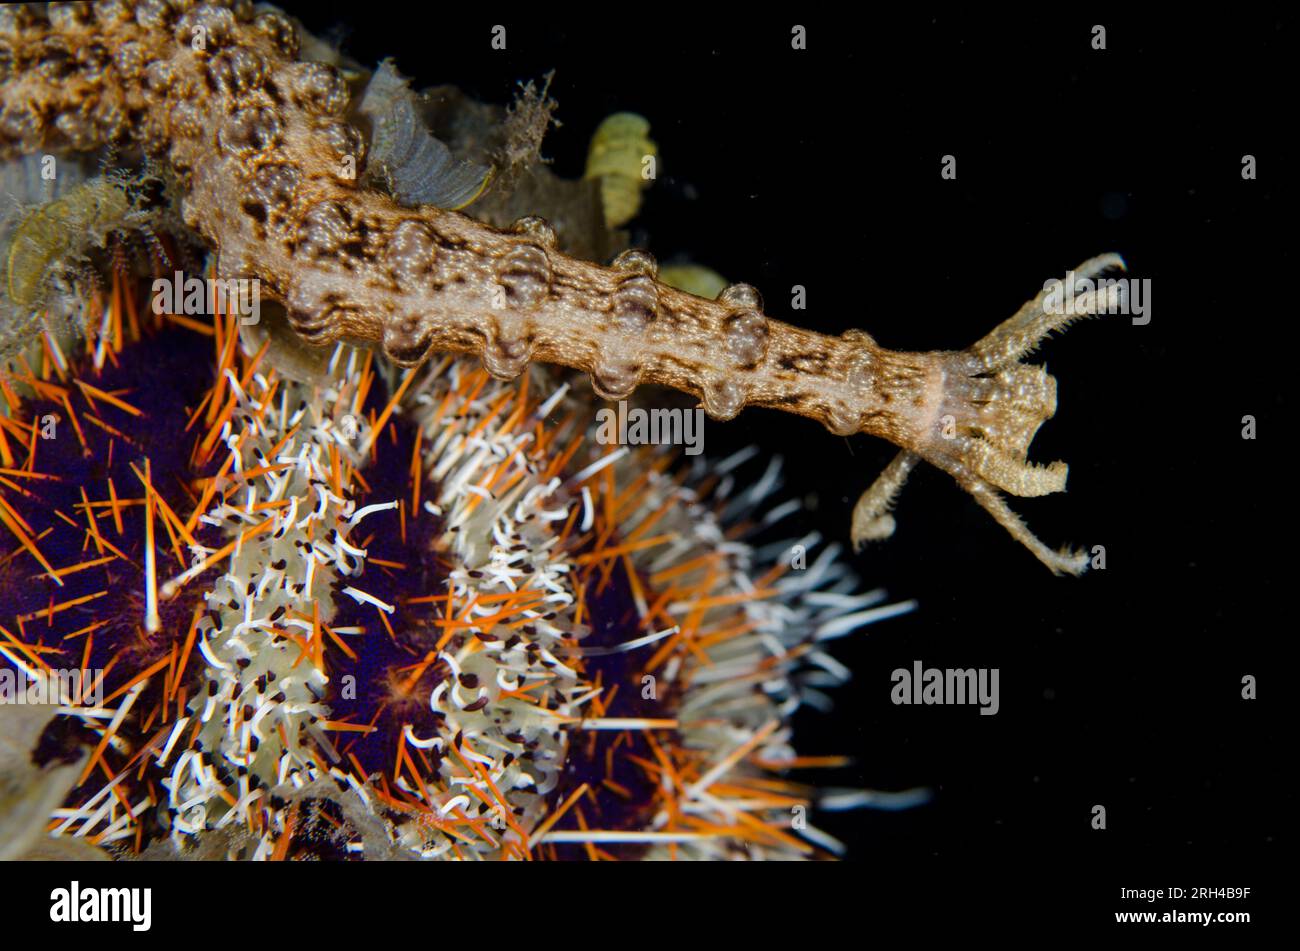 Sea Cucumber, Synaptidae Family, feeding with tentacles on Cake Urchin, Tripneustes gratilla, Night dive, TK1 dive site, Lembeh Straits, Sulawesi, Ind Stock Photo